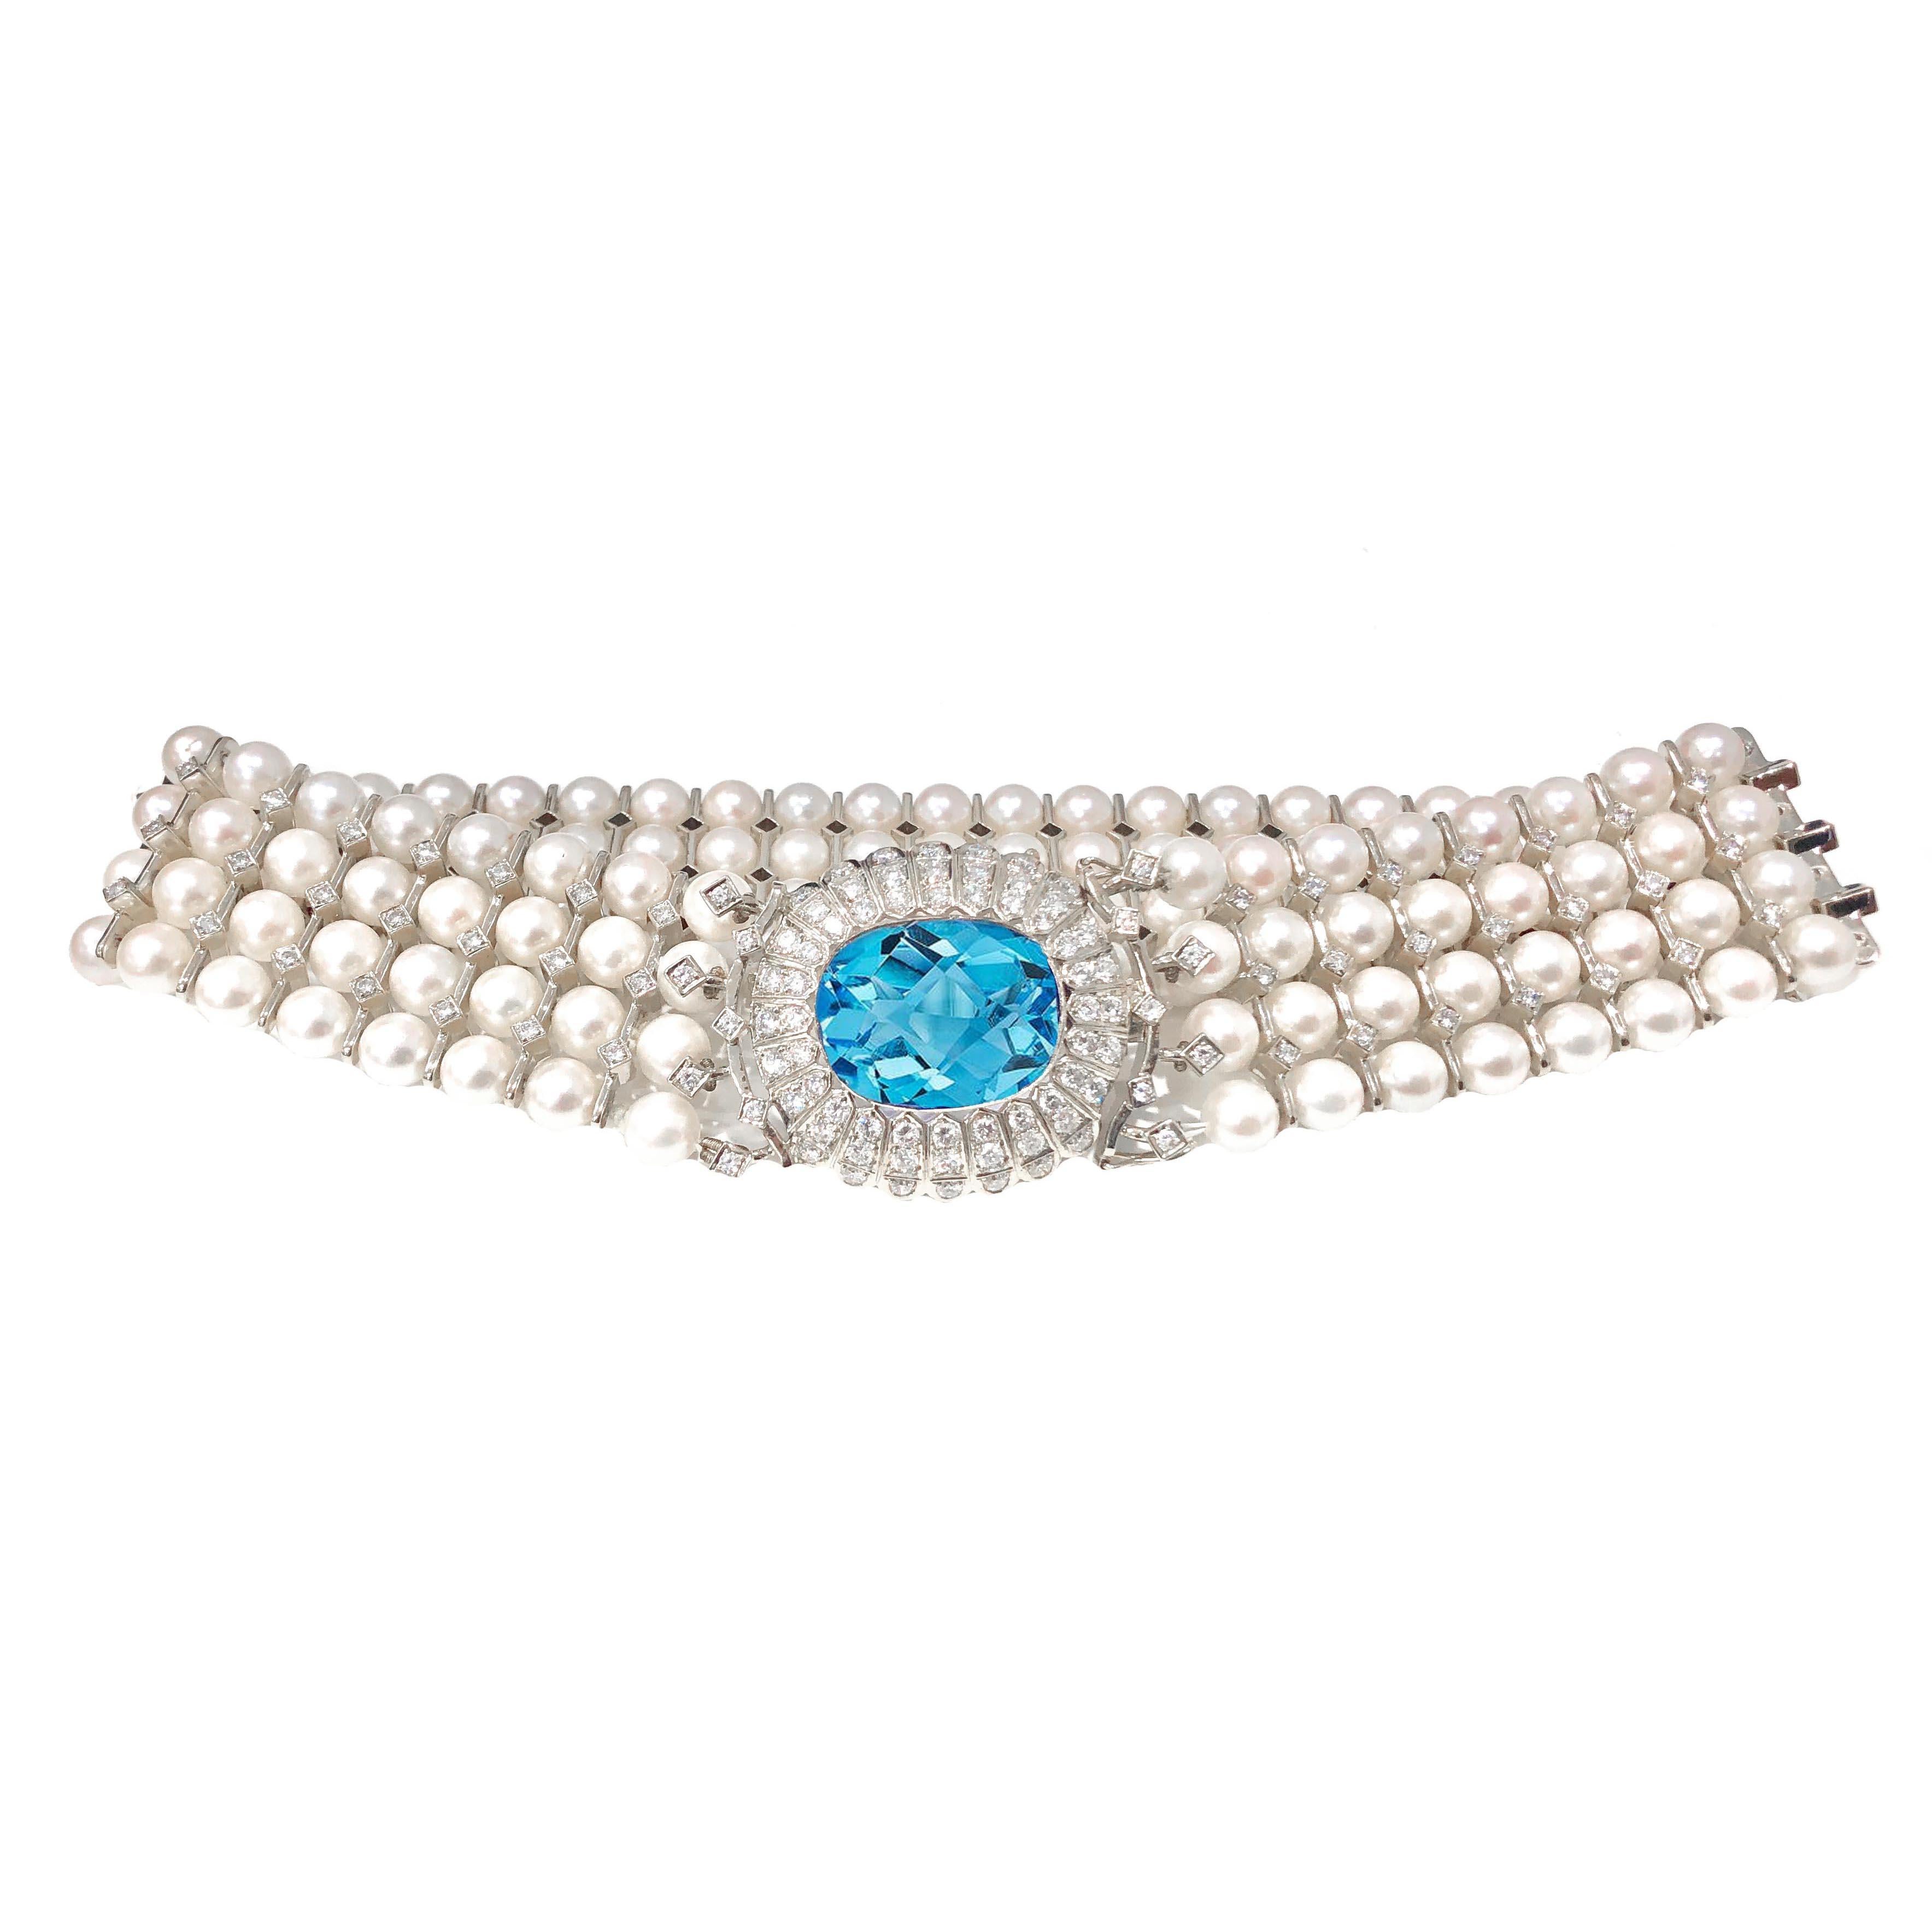 Art Deco, 18 karat white gold, pearl, blue topaz and diamond collar necklace and bracelet set. The necklace has an estimated 7.00 carats total weight in diamonds, 20.00 + carat natural blue topaz center and 152 genuine pearls.
The bracelet has an